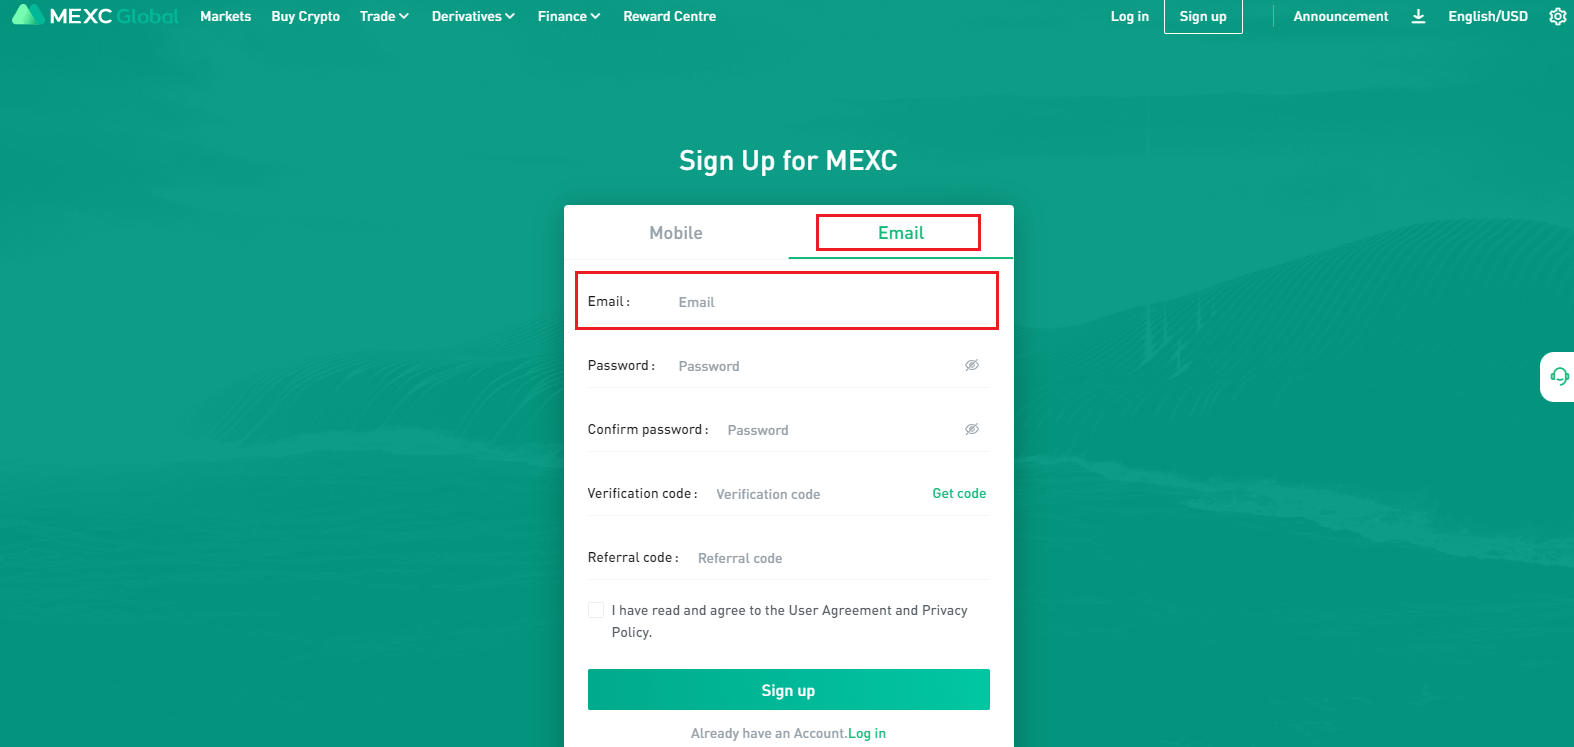 How to Open Account and Deposit at MEXC